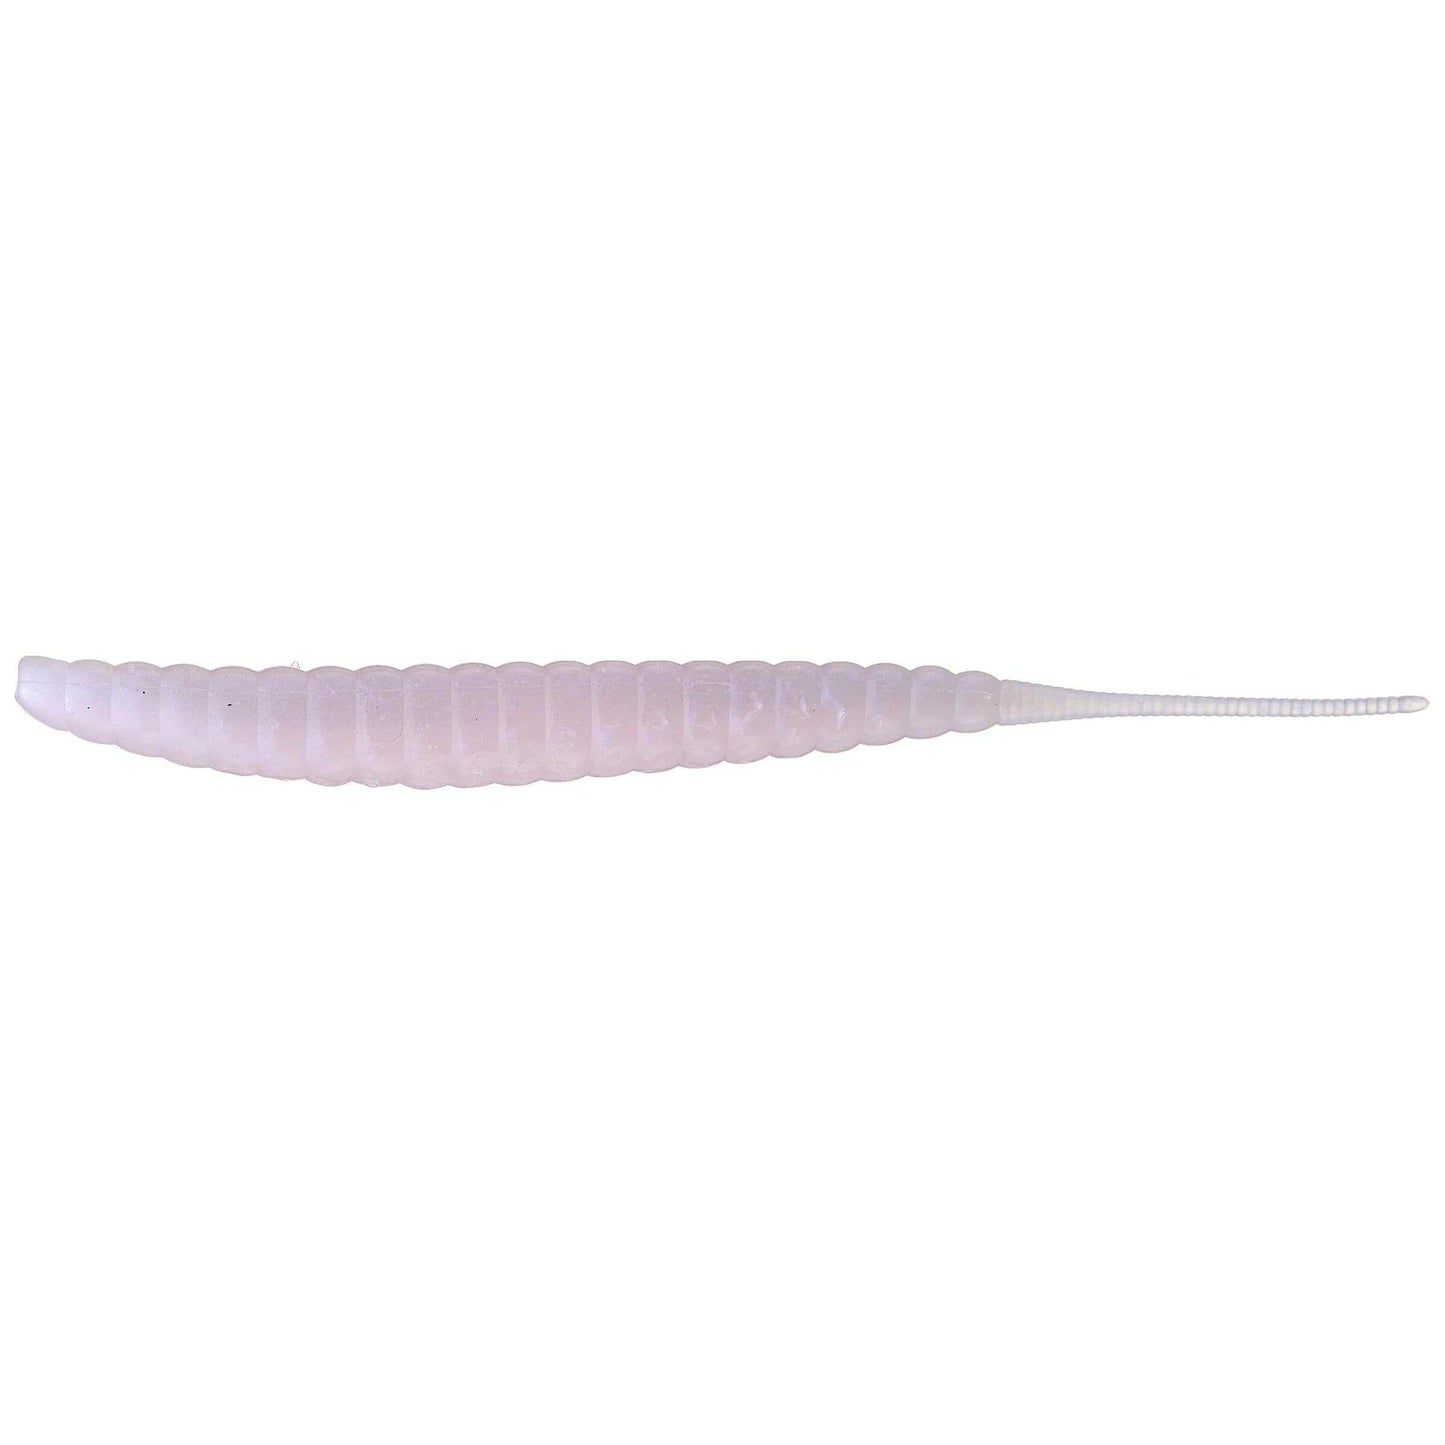 Geecrack Revival Shad Worm Natural Pro Blue